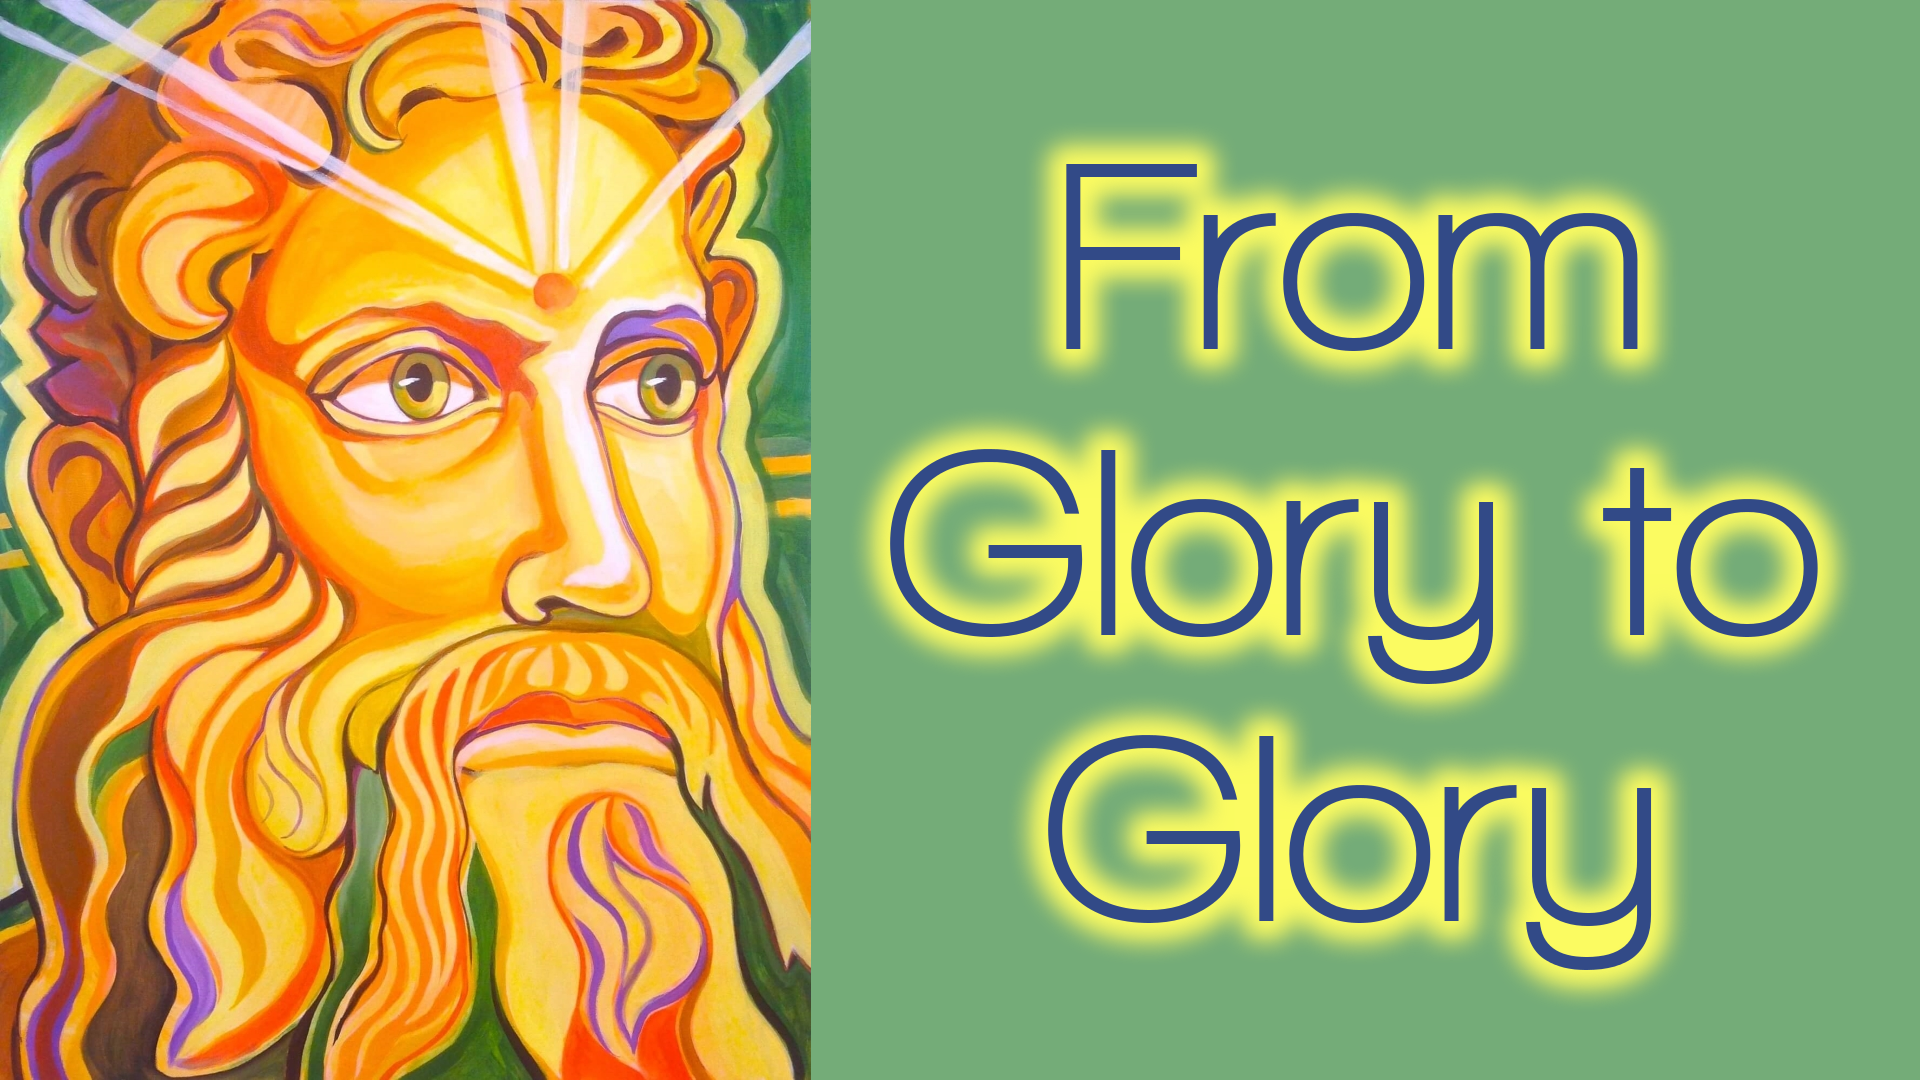 Pilgrimage to the Glory Cloud, Part 4: From Glory to Glory